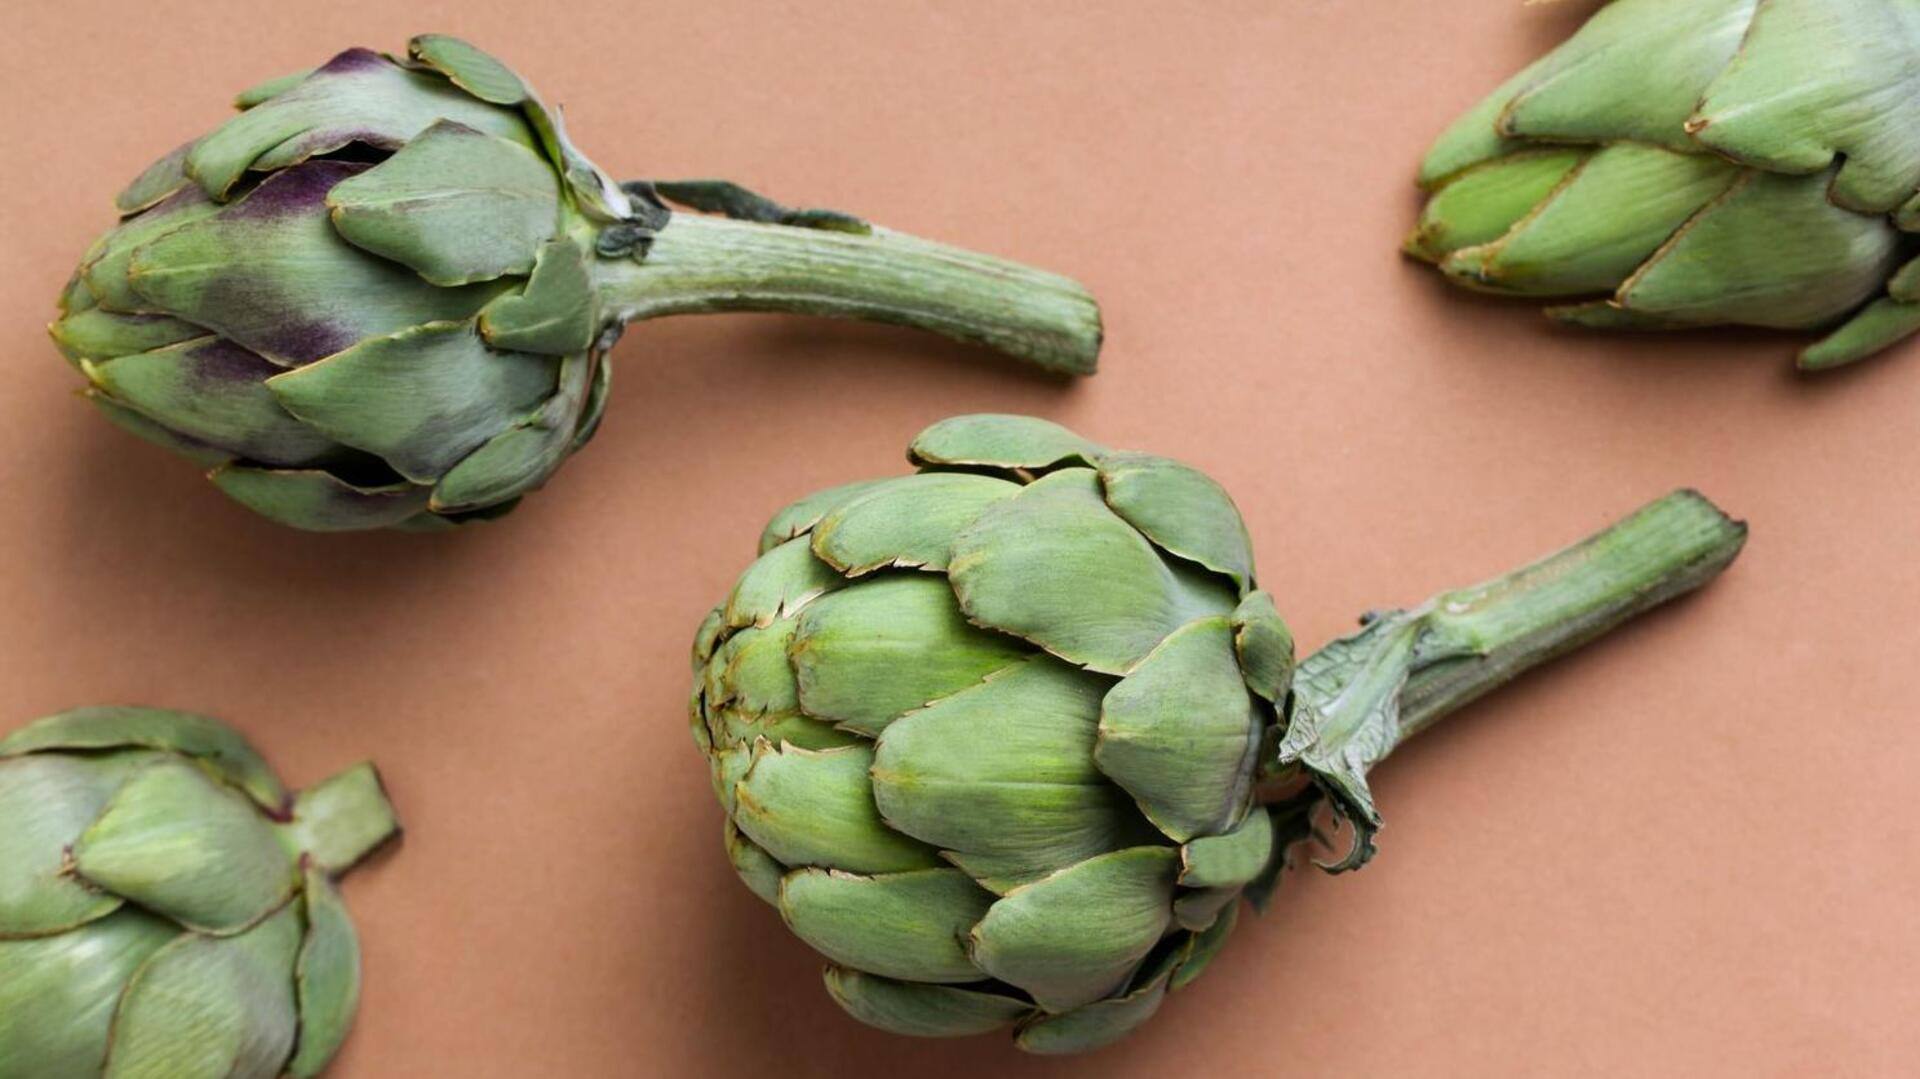 Artichoke-based dishes that are all about health and flavor